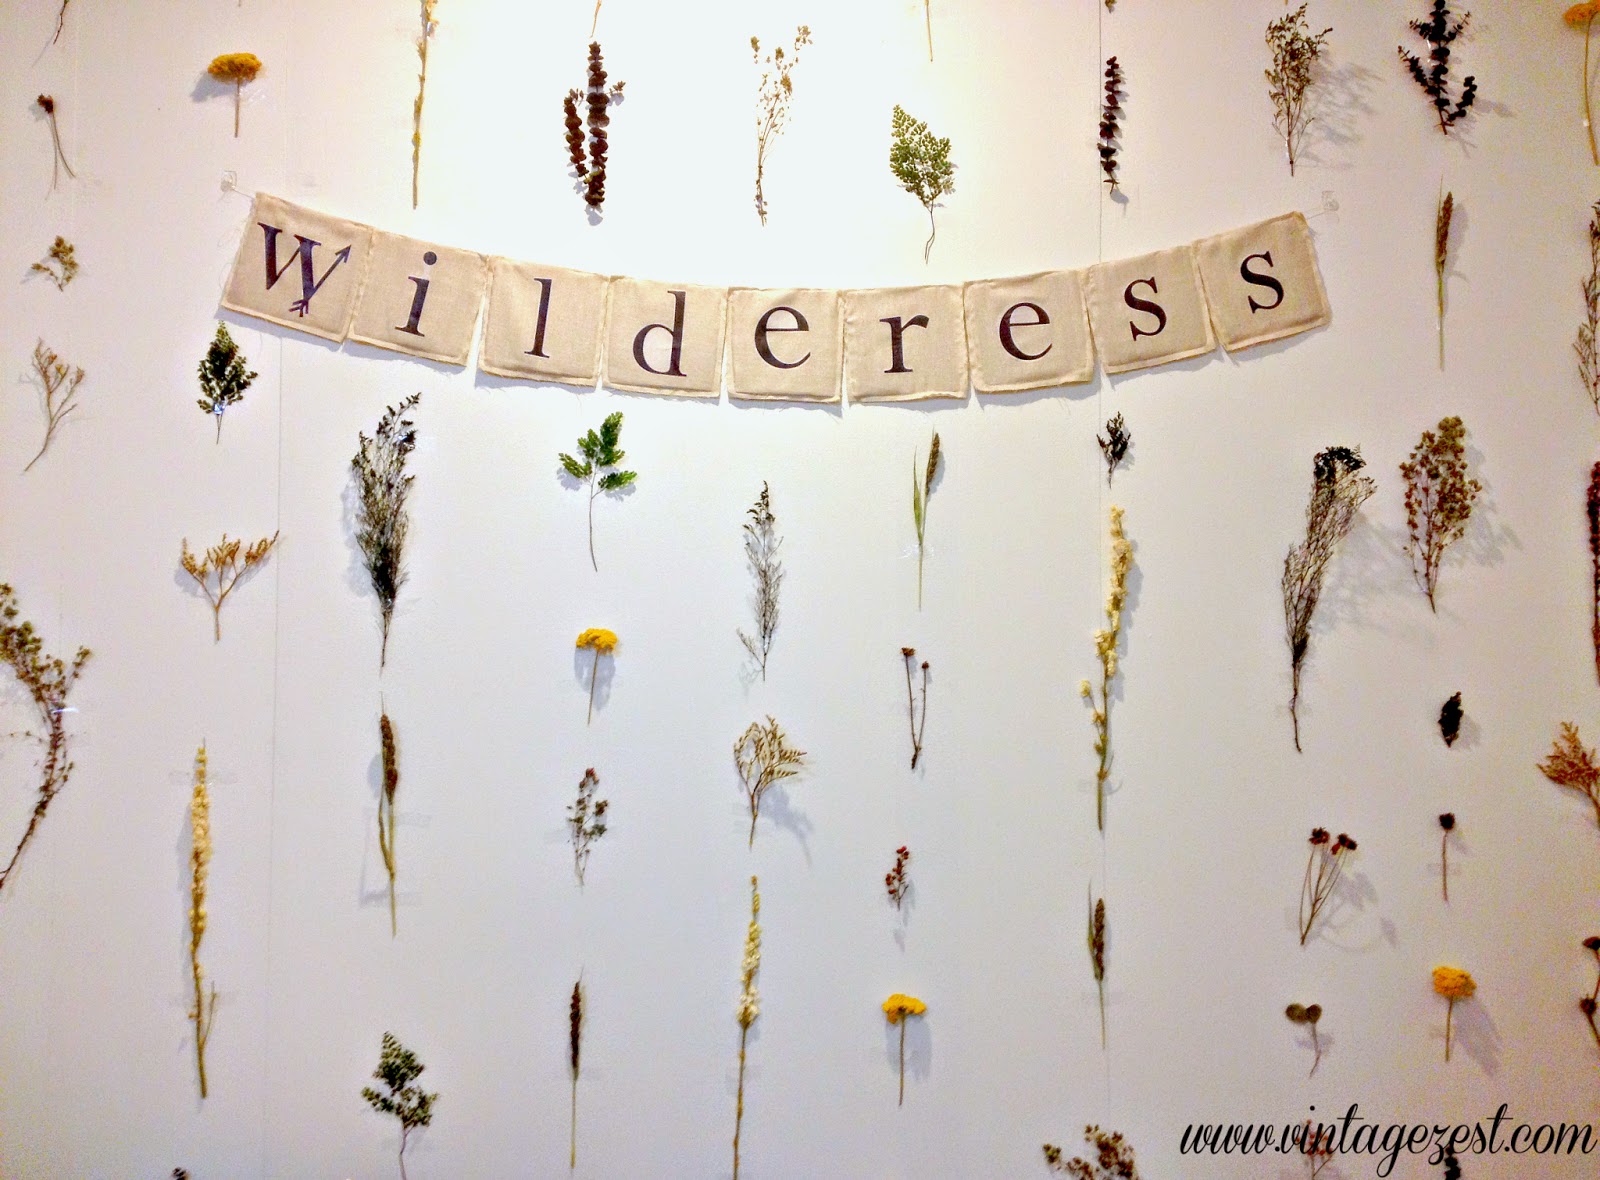 Wilderess Candles & Jewelry Shop Small Saturday Showcase Feature on Diane's Vintage Zest!